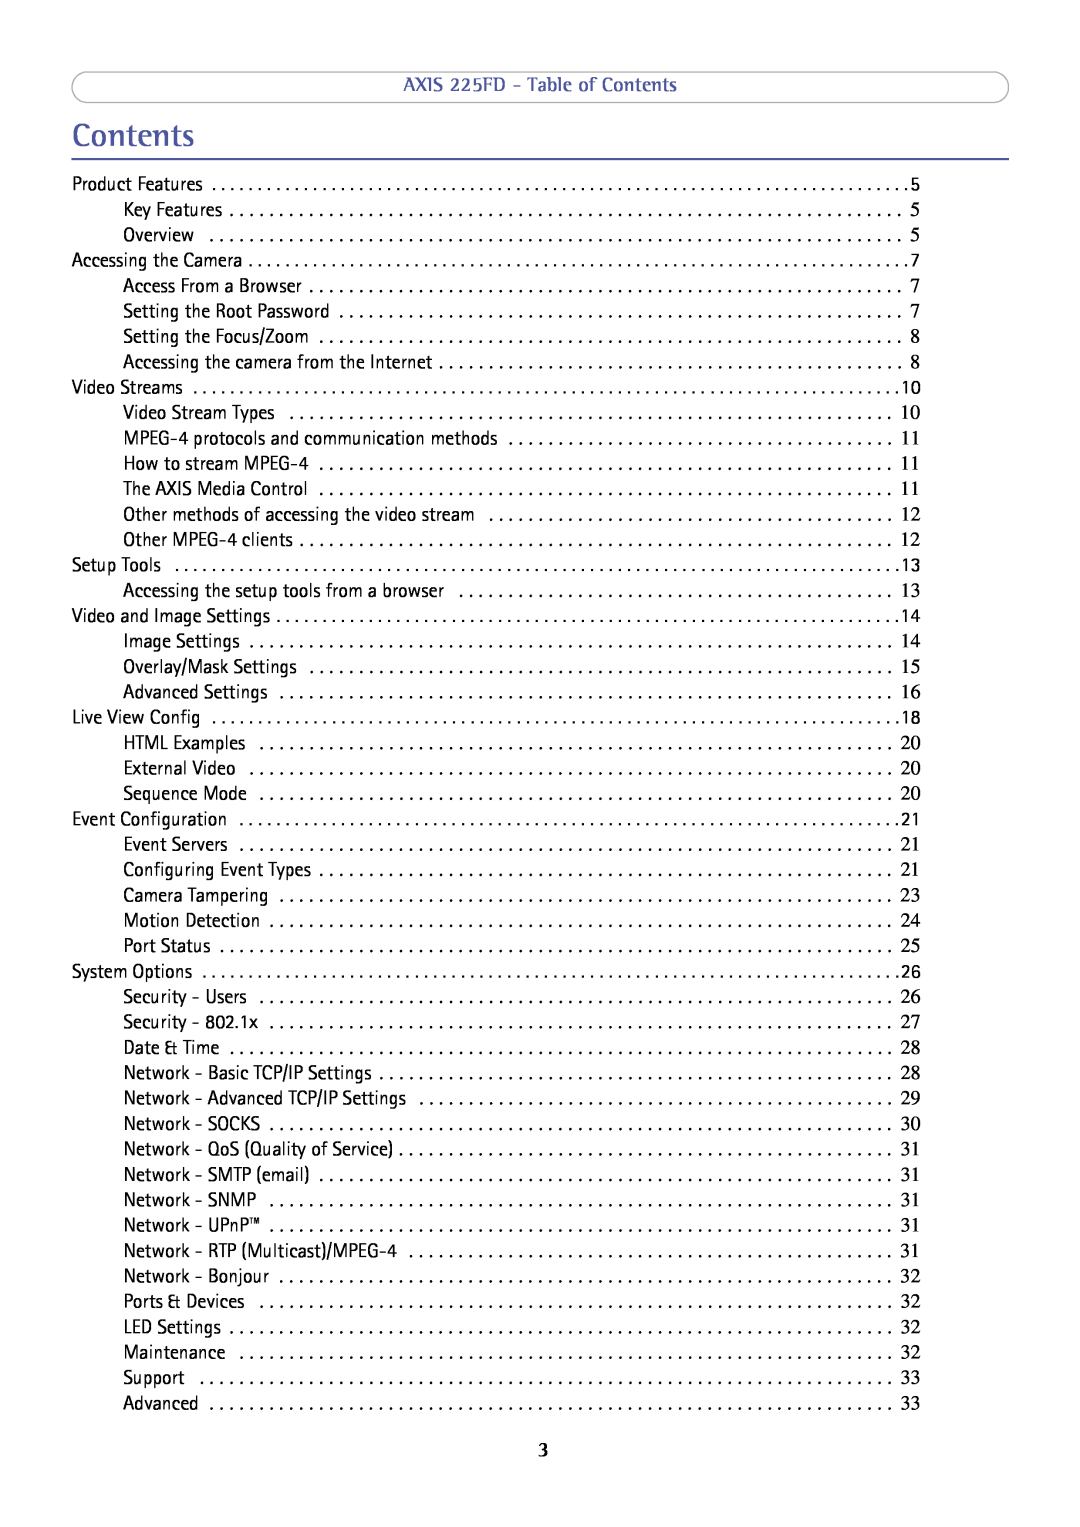 Axis Communications axis fixed dome network camera user manual AXIS 225FD - Table of Contents 